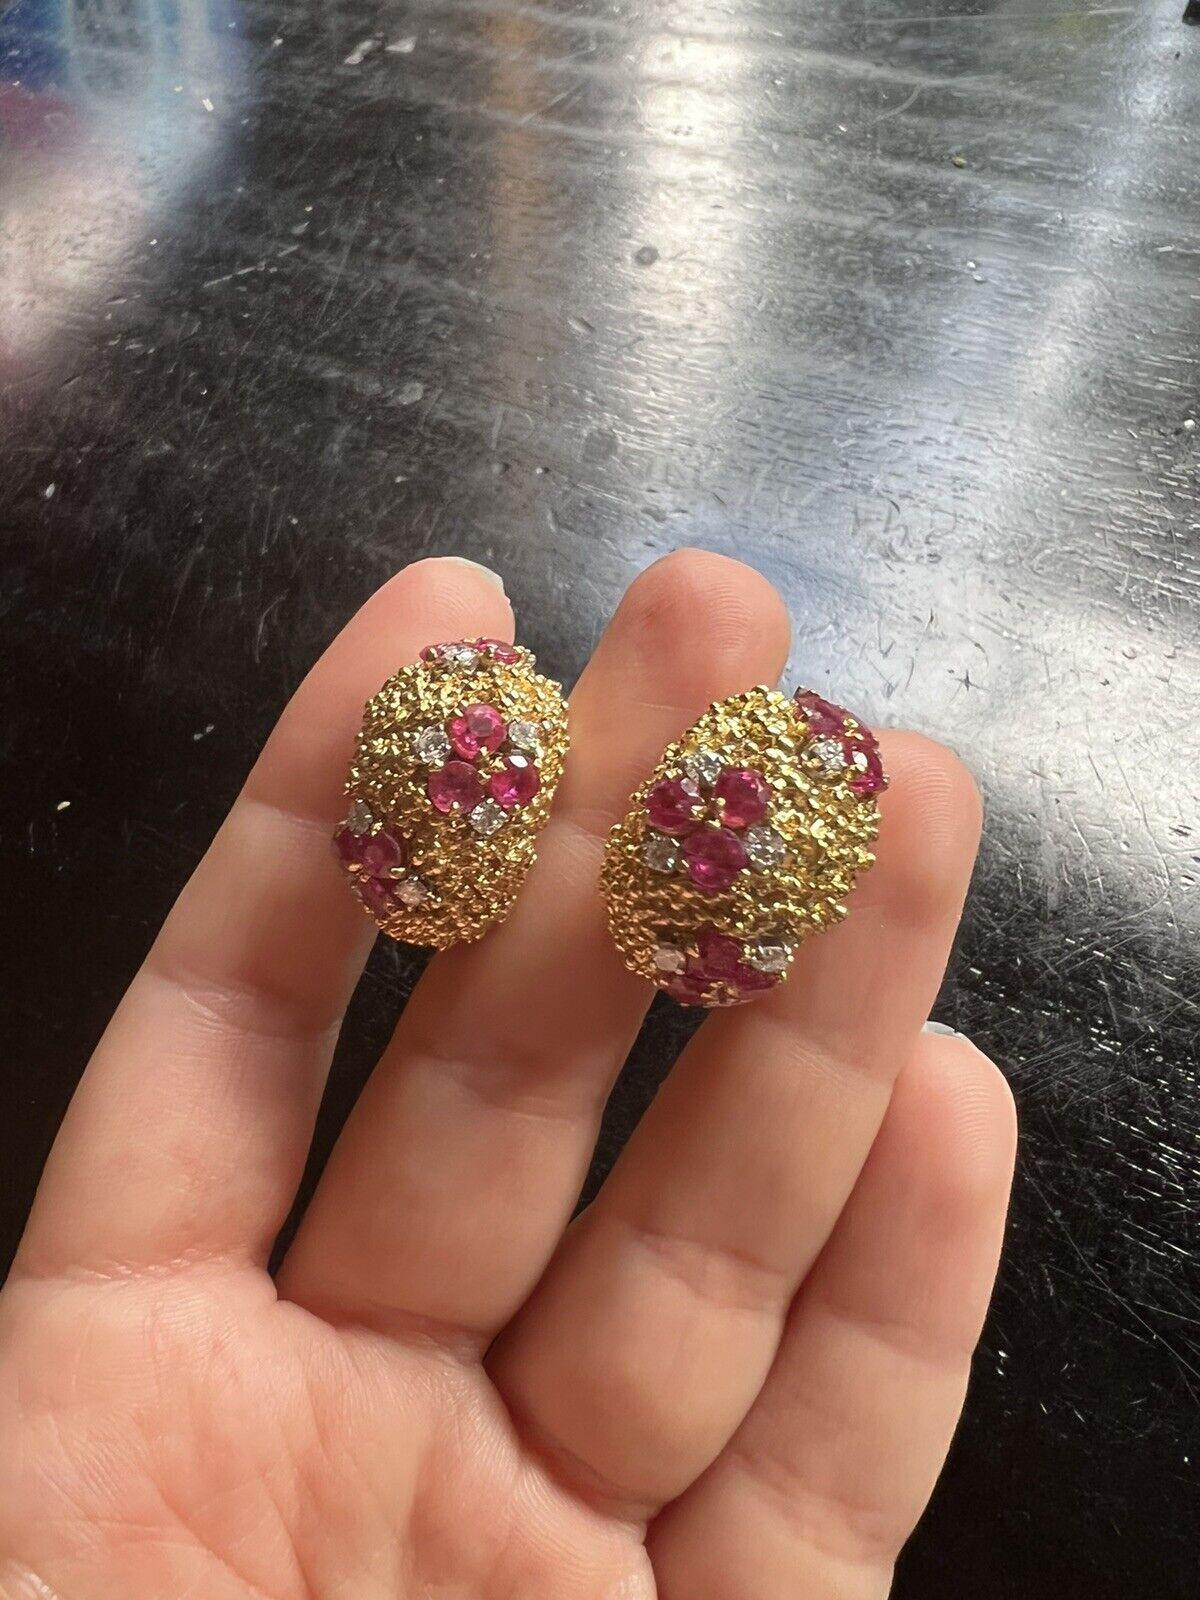 Tiffany & Co. 18k Hammered Yellow Gold, Ruby & Diamond Earrings Retro Circa 1950s

Here is your chance to purchase a beautiful and highly collectible designer pair of earrings.  Truly a great piece at a great price! 

Weight: 28.6 grams

Condition: